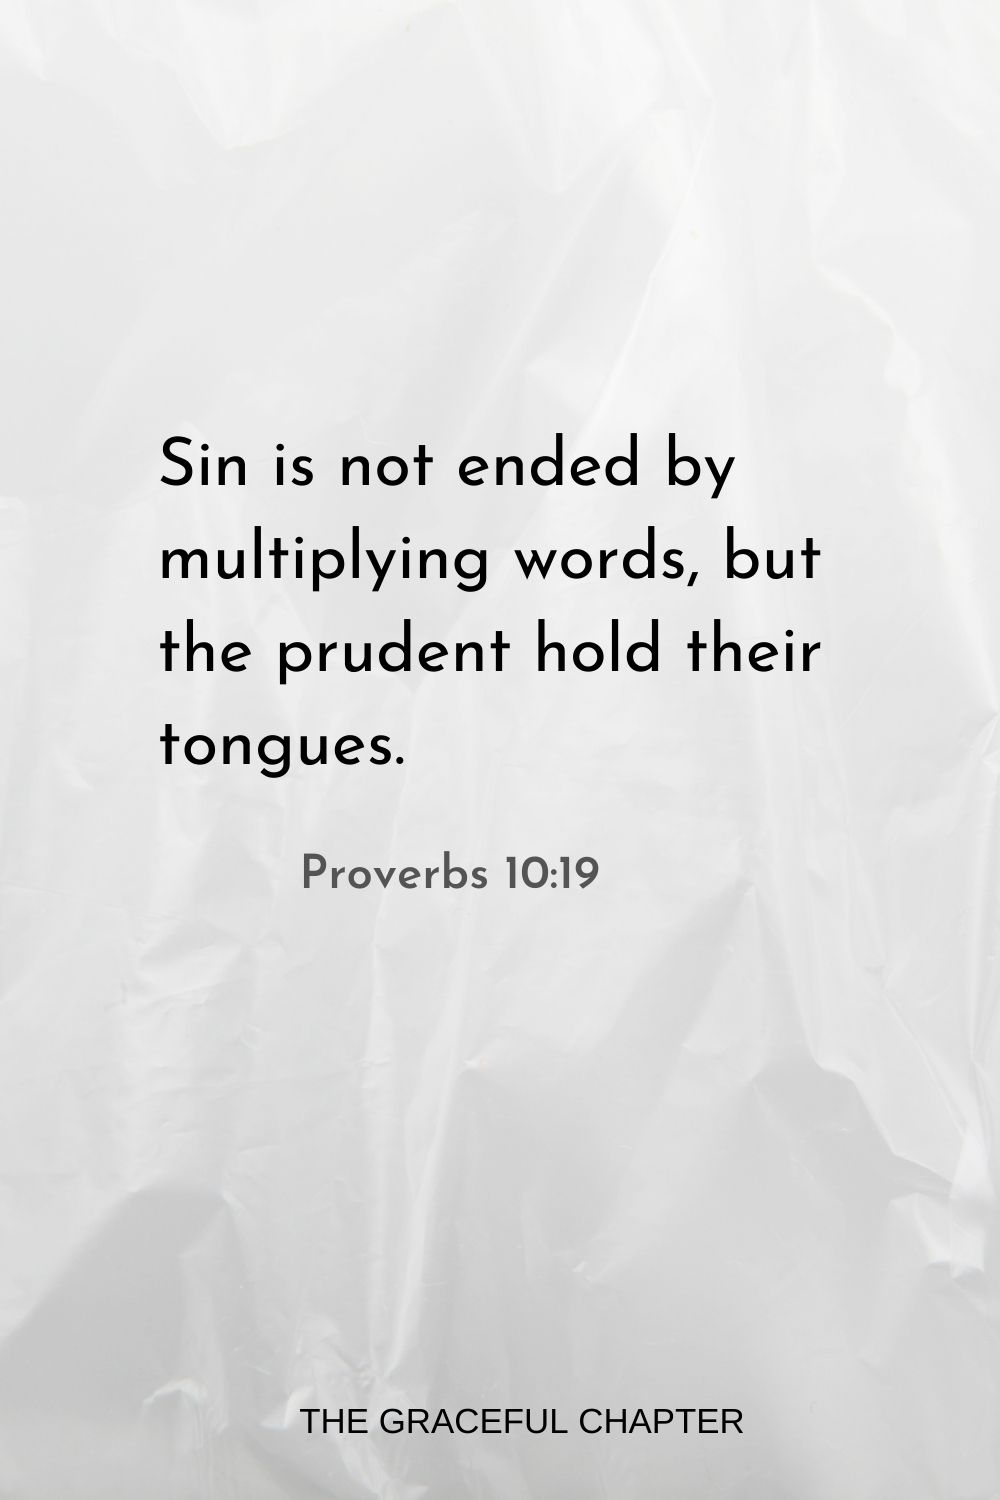 Sin is not ended by multiplying words, but the prudent hold their tongues. Proverbs 10:19